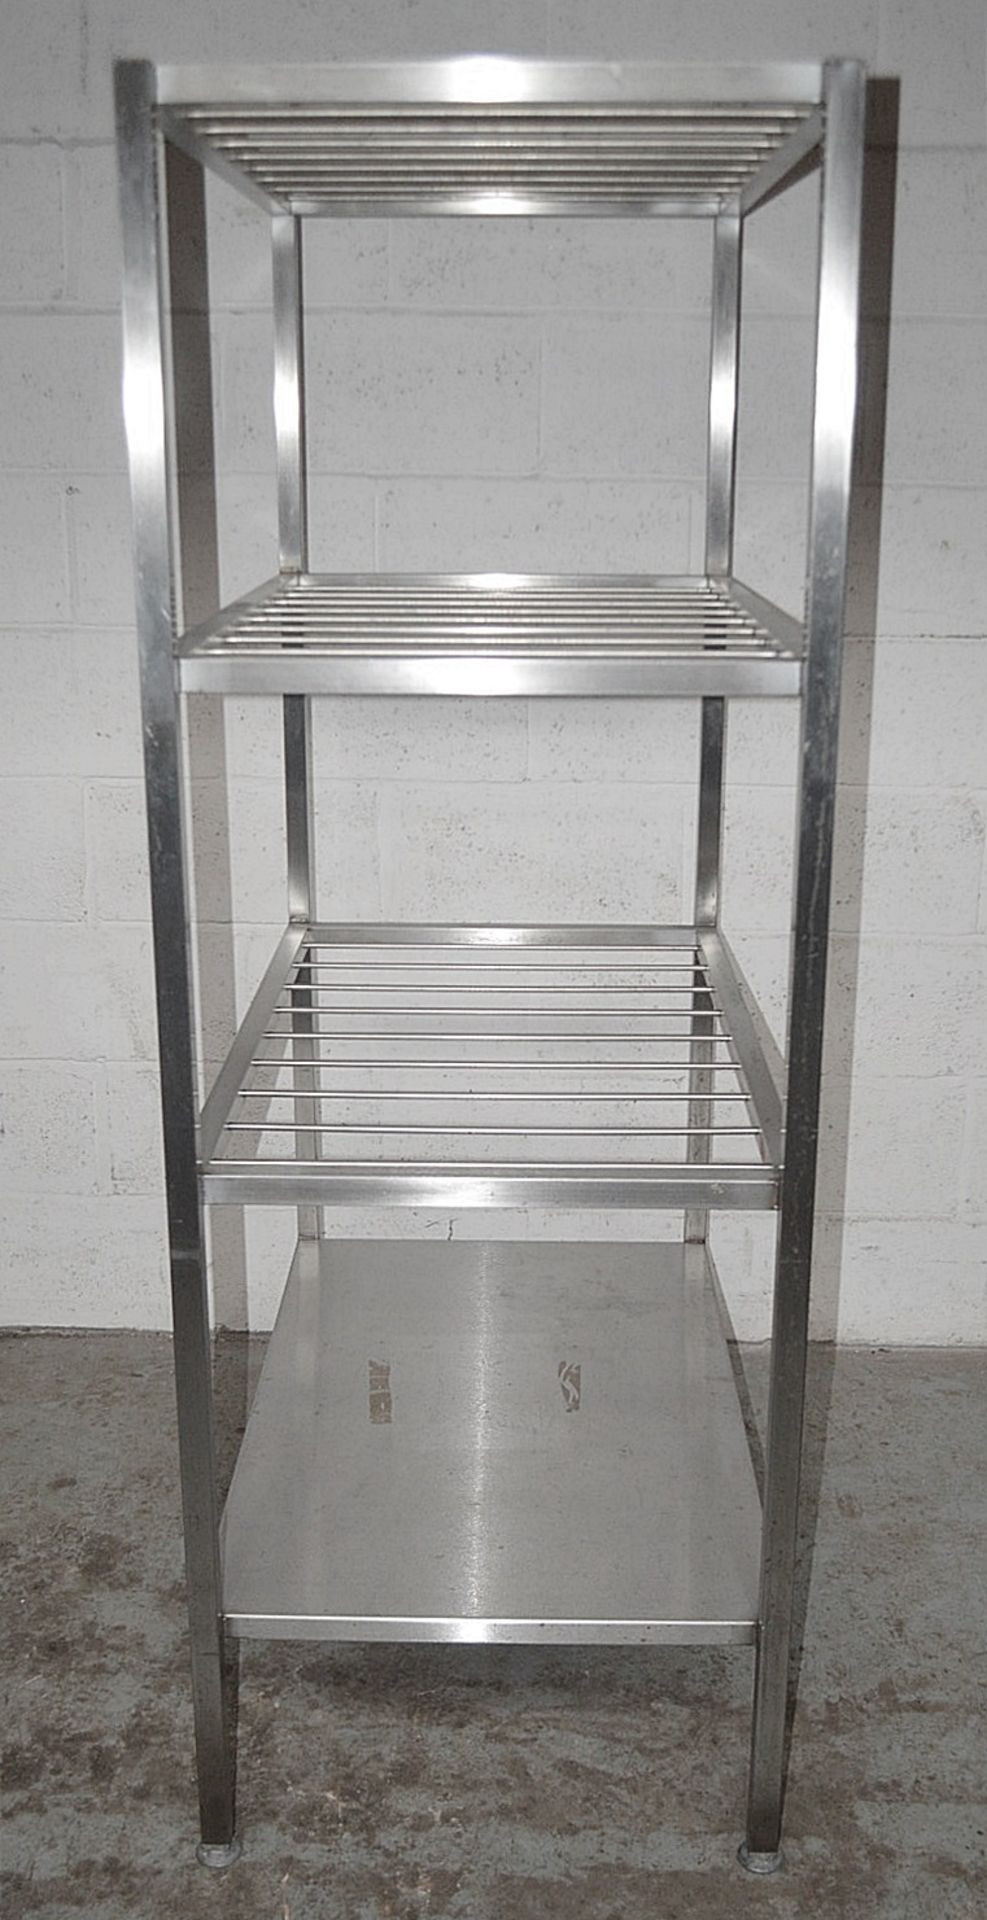 1 x Stainless Steel Commercial Kitchen Veg Rack - Dimensions: H174 x W100 x D60cm - Very Recently - Image 2 of 3